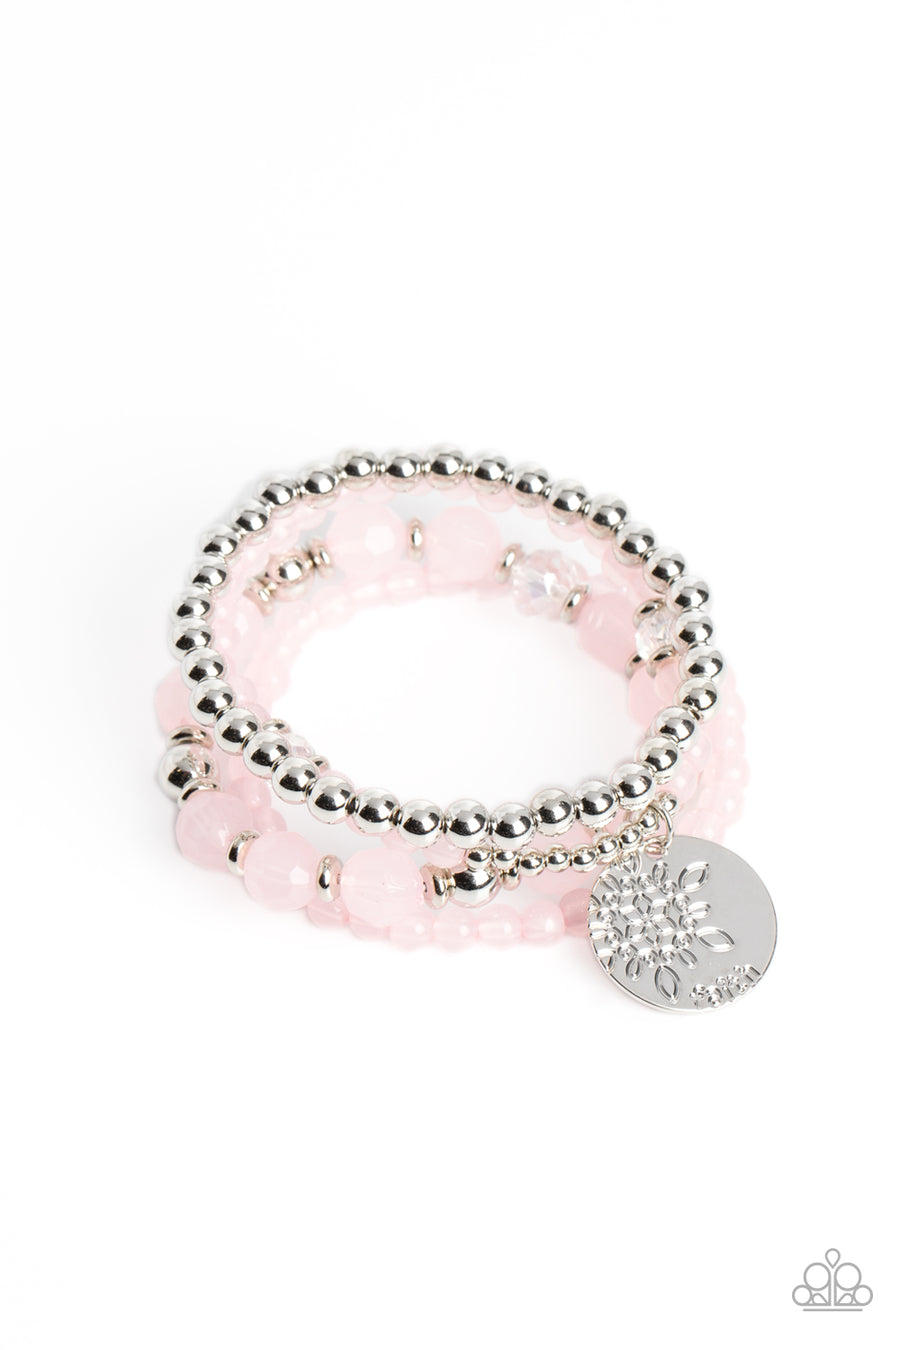 Surfer Style - Pink and Silver Bracelet - Paparazzi Accessories Bejeweled Accessories By Kristie